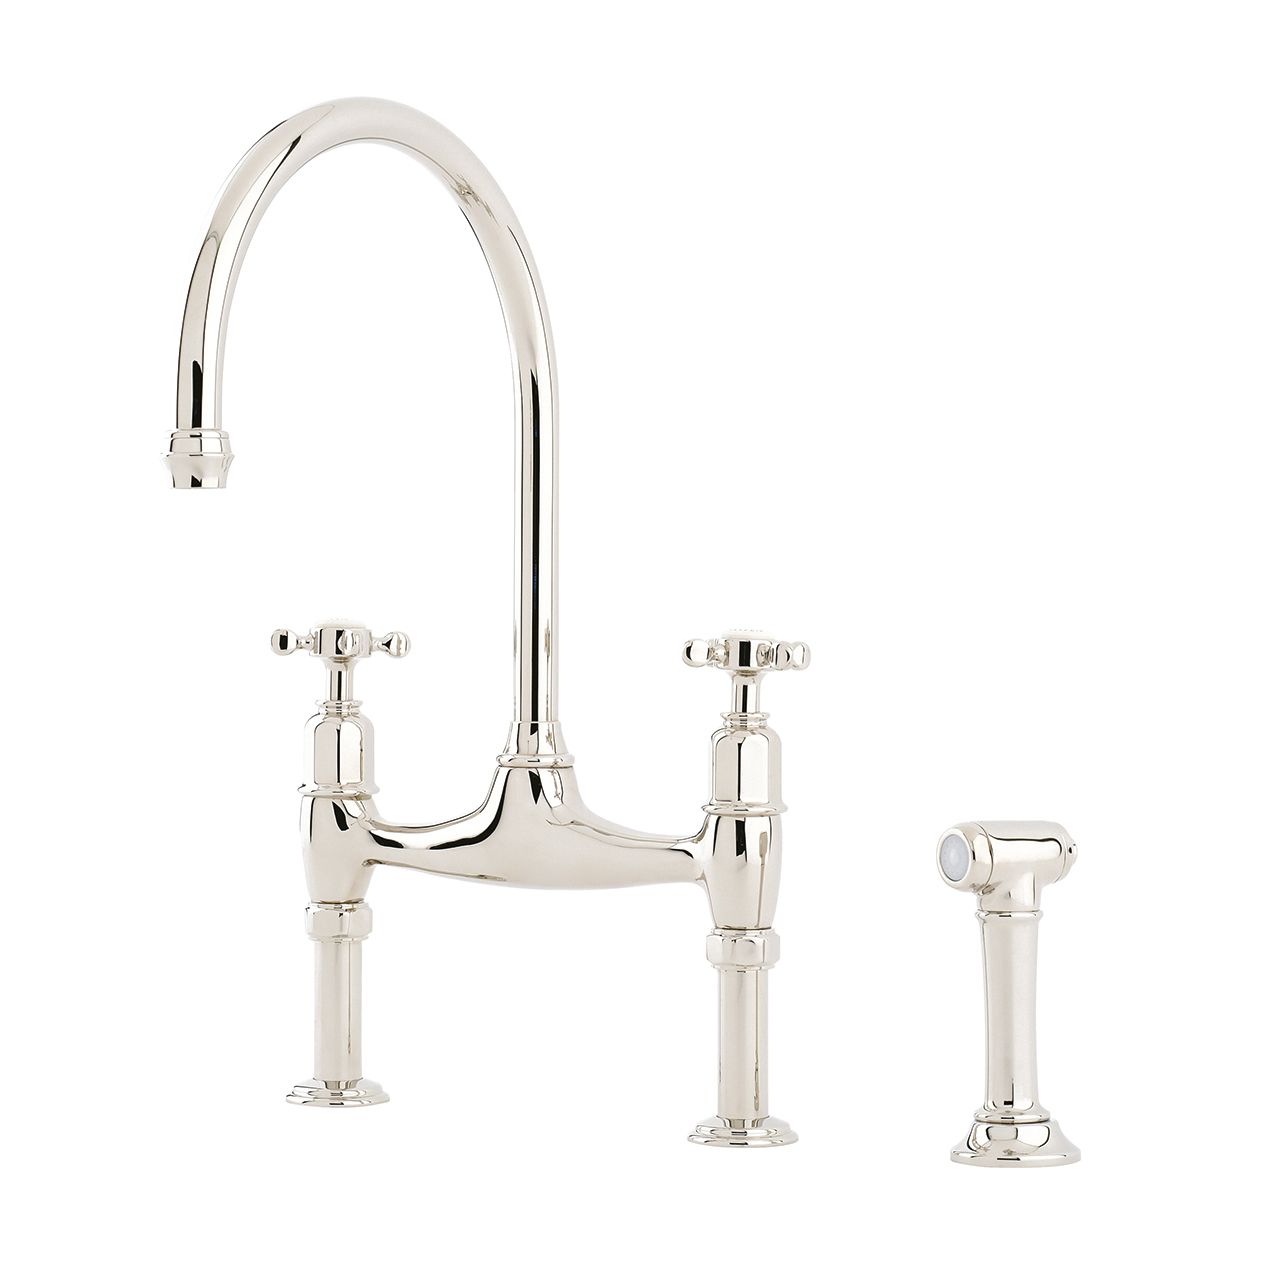 Ionian Deck Mounted Two Hole tap with Crosstop Handles and Rinse – Perrin & Rowe